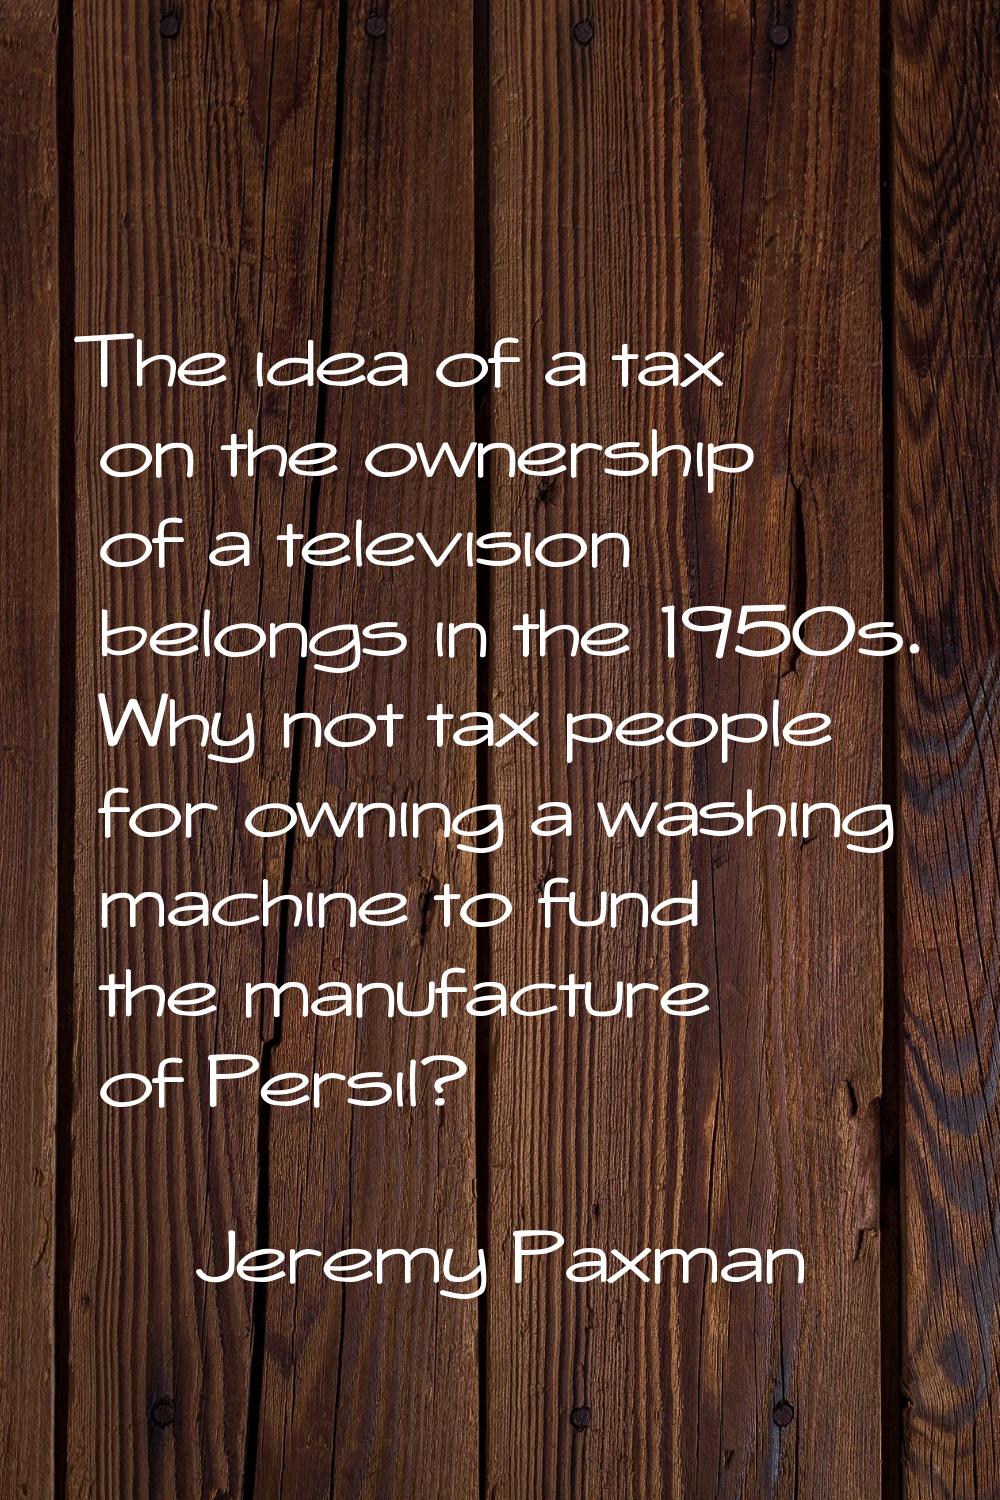 The idea of a tax on the ownership of a television belongs in the 1950s. Why not tax people for own